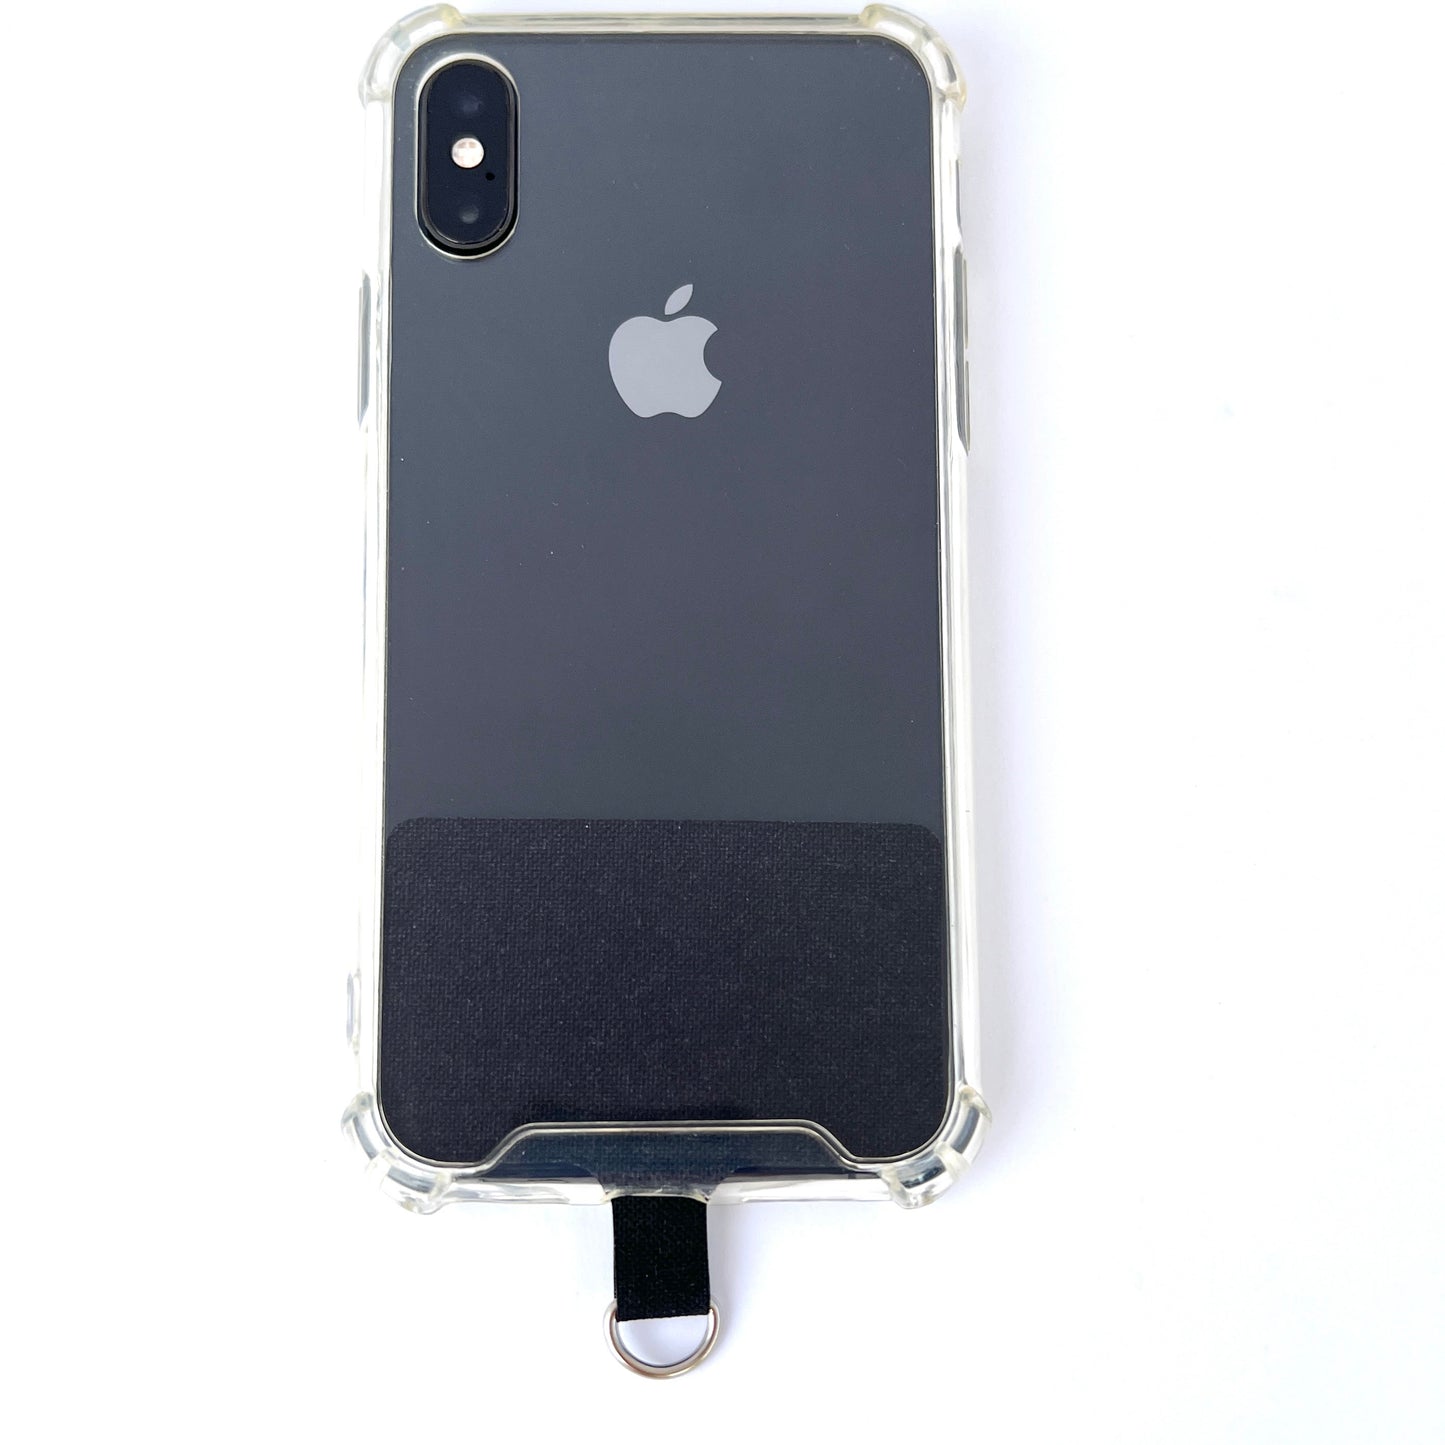 Black Solid Phone Connector Patch